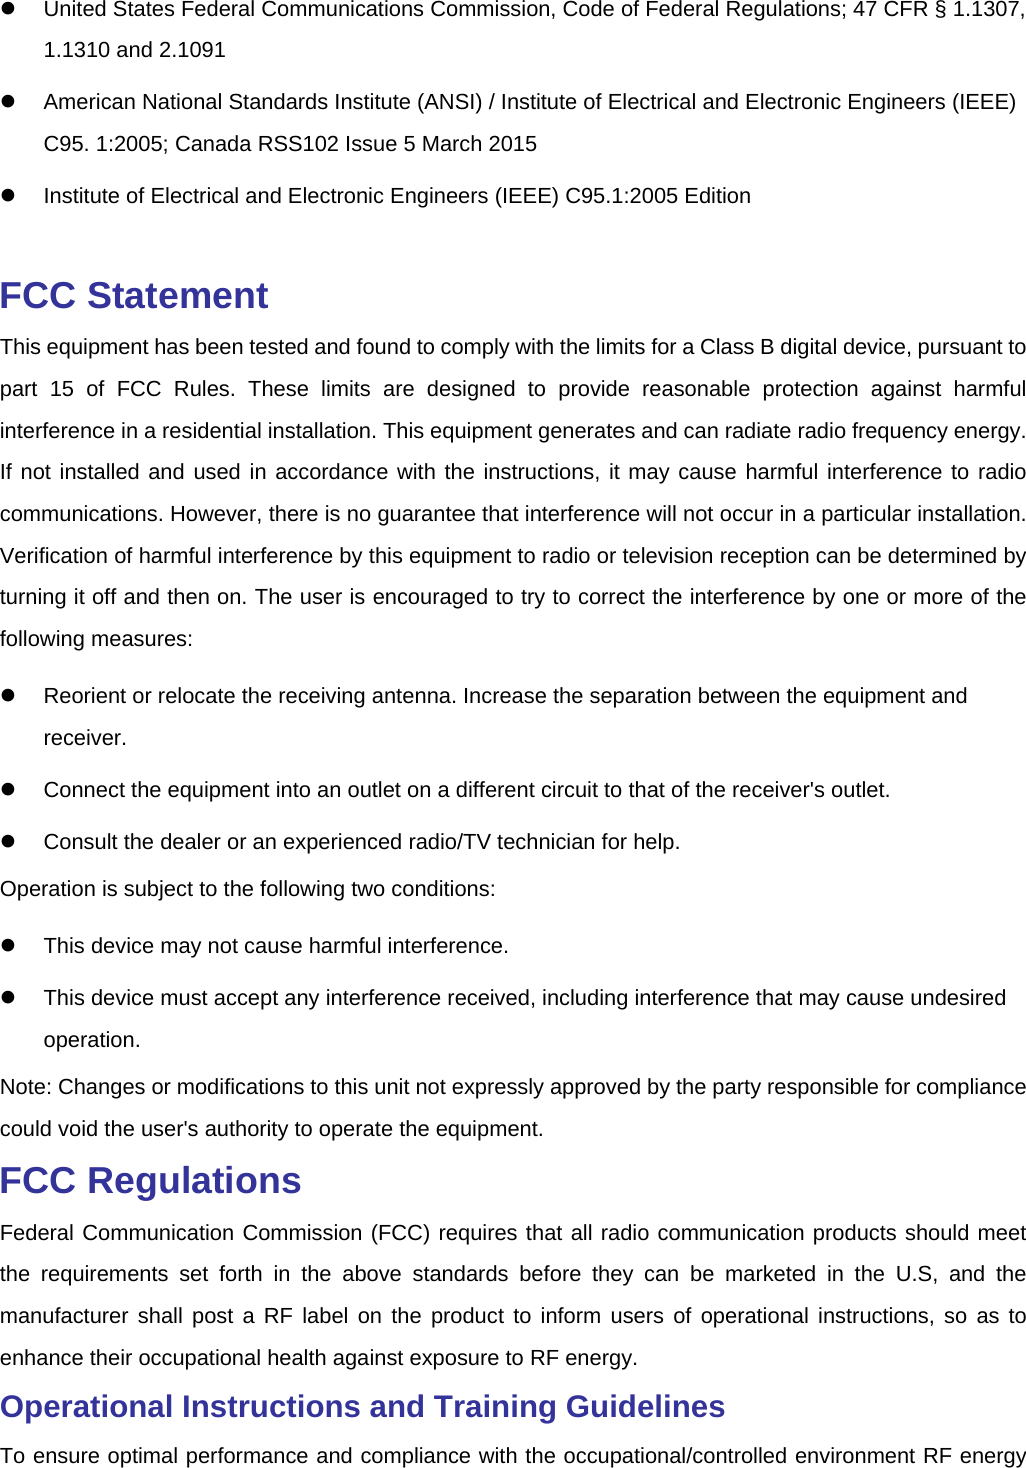     United States Federal Communications Commission, Code of Federal Regulations; 47 CFR § 1.1307, 1.1310 and 2.1091   American National Standards Institute (ANSI) / Institute of Electrical and Electronic Engineers (IEEE) C95. 1:2005; Canada RSS102 Issue 5 March 2015   Institute of Electrical and Electronic Engineers (IEEE) C95.1:2005 Edition  FCC Statement This equipment has been tested and found to comply with the limits for a Class B digital device, pursuant to part 15 of FCC Rules. These limits are designed to provide reasonable protection against harmful interference in a residential installation. This equipment generates and can radiate radio frequency energy. If not installed and used in accordance with the instructions, it may cause harmful interference to radio communications. However, there is no guarantee that interference will not occur in a particular installation. Verification of harmful interference by this equipment to radio or television reception can be determined by turning it off and then on. The user is encouraged to try to correct the interference by one or more of the following measures:   Reorient or relocate the receiving antenna. Increase the separation between the equipment and receiver.   Connect the equipment into an outlet on a different circuit to that of the receiver&apos;s outlet.   Consult the dealer or an experienced radio/TV technician for help. Operation is subject to the following two conditions:     This device may not cause harmful interference.   This device must accept any interference received, including interference that may cause undesired operation. Note: Changes or modifications to this unit not expressly approved by the party responsible for compliance could void the user&apos;s authority to operate the equipment.   FCC Regulations Federal Communication Commission (FCC) requires that all radio communication products should meet the requirements set forth in the above standards before they can be marketed in the U.S, and the manufacturer shall post a RF label on the product to inform users of operational instructions, so as to enhance their occupational health against exposure to RF energy.   Operational Instructions and Training Guidelines   To ensure optimal performance and compliance with the occupational/controlled environment RF energy 